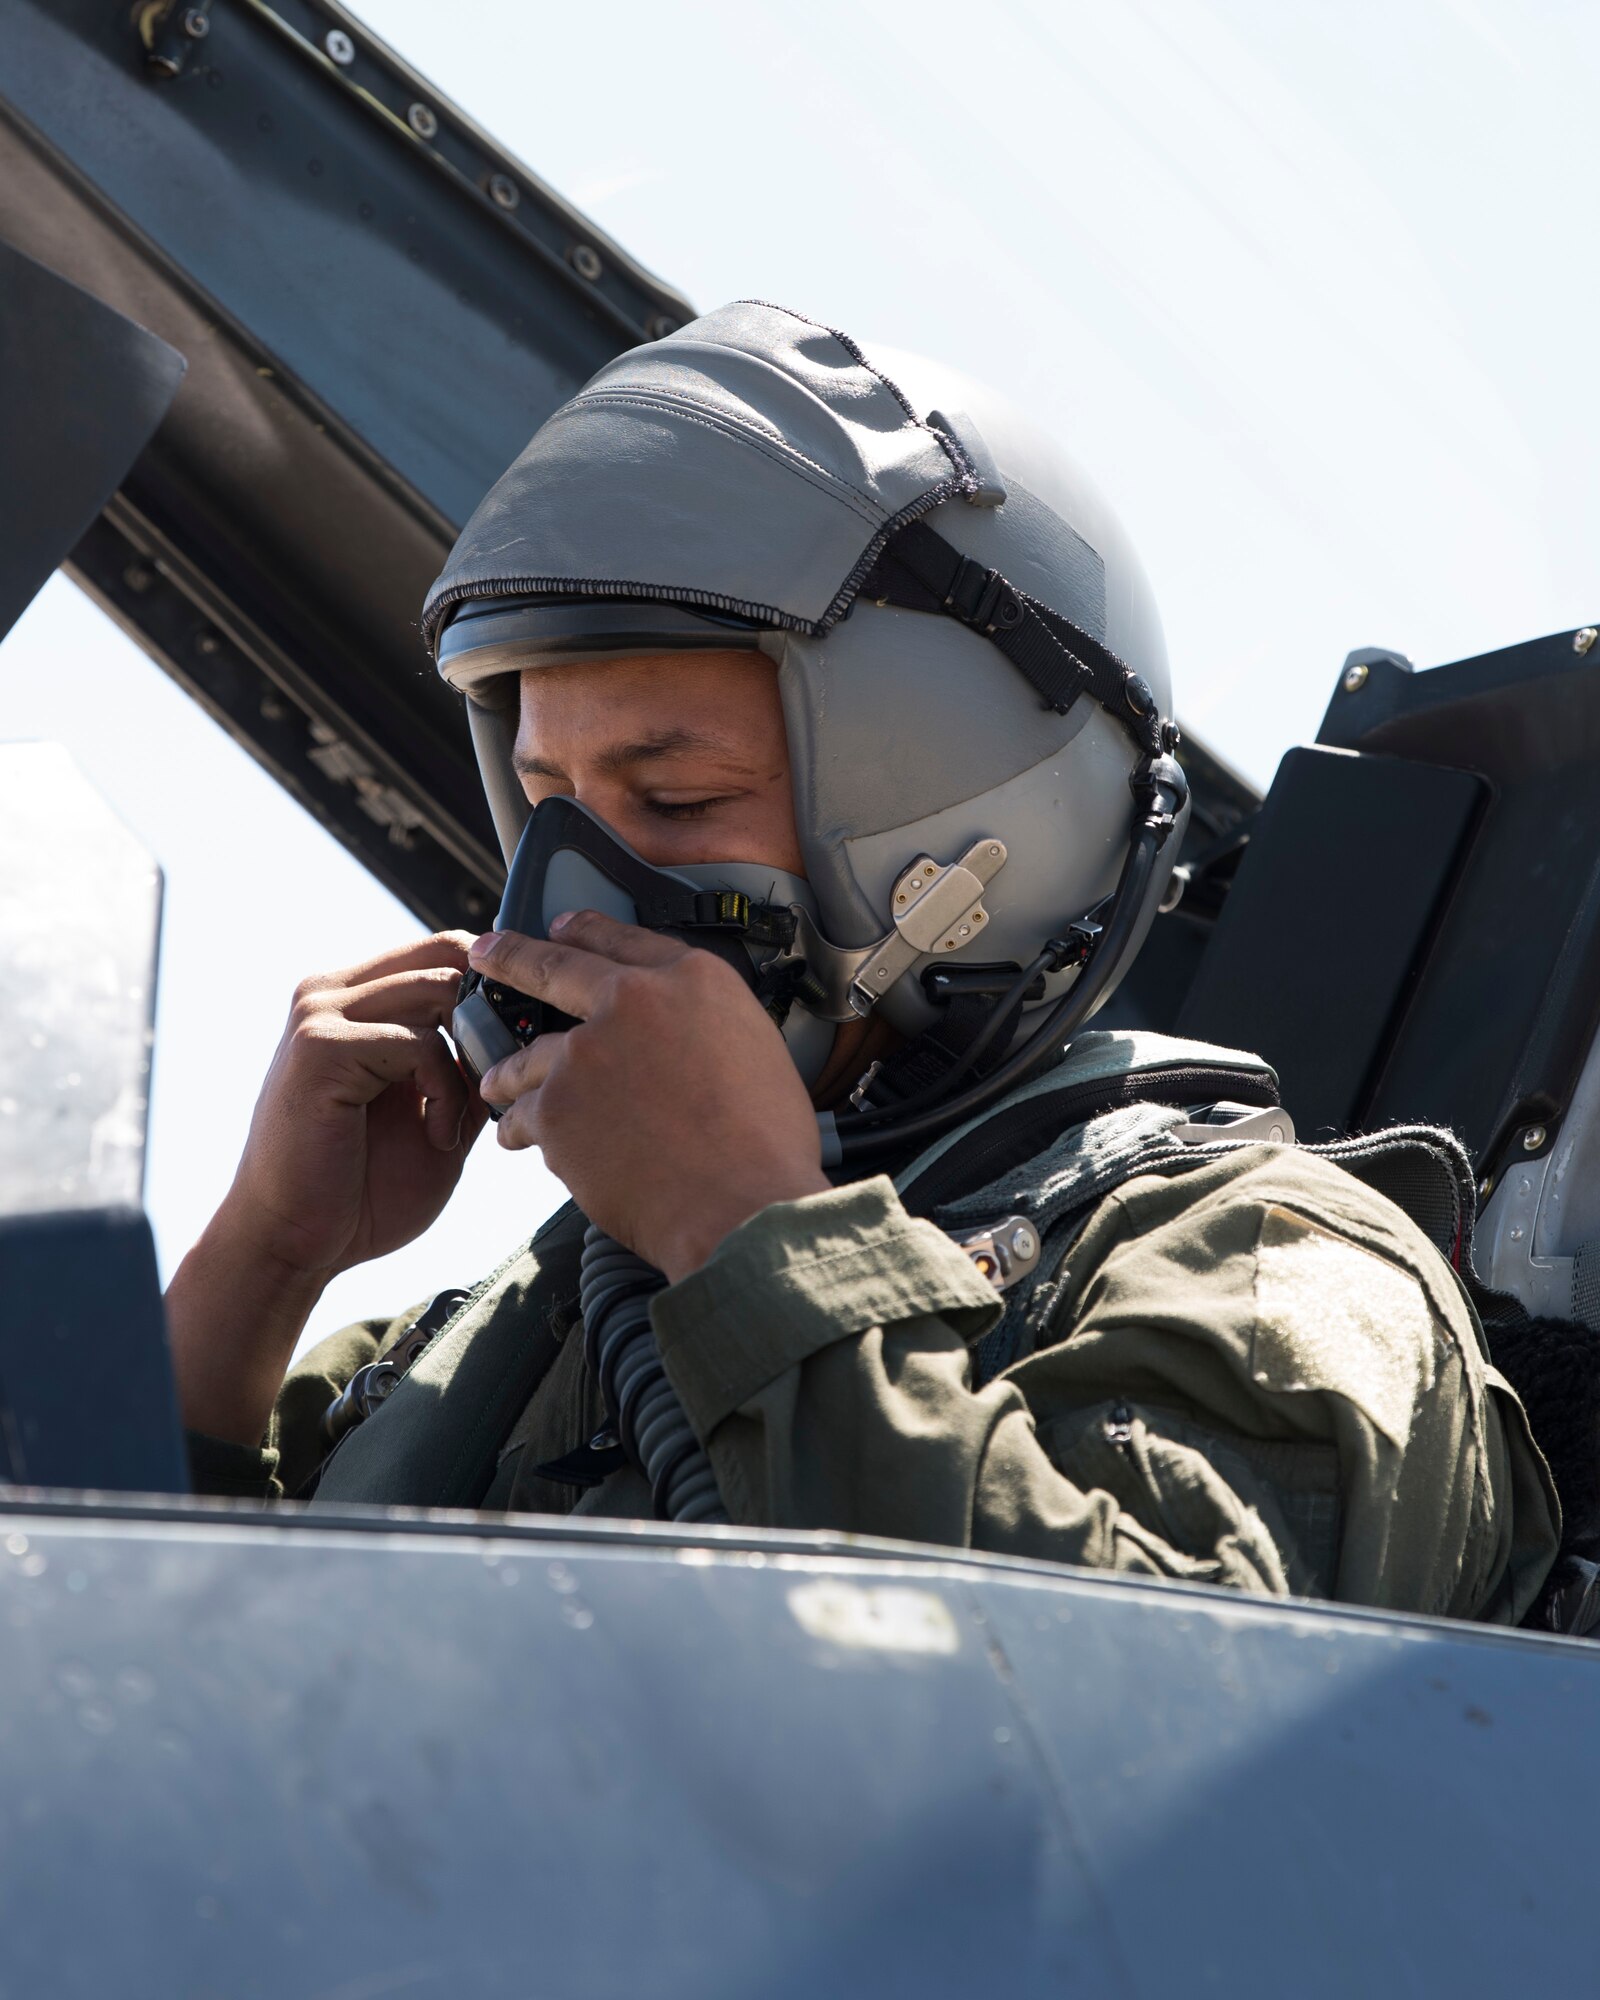 Airman 1st Class Mequail Fridge, 311th Aircraft Maintenance Unit crew chief, dons his helmet before a familiarization flight, April 25, 2019, on Hill Air Force Base, Utah. The 311th Fighter Squadron had a goal of eight familiarization flights per day for operations and maintenance personnel during exercise Venom 19-01. (U.S. Air Force photo by Staff Sgt. BreeAnn Sachs)